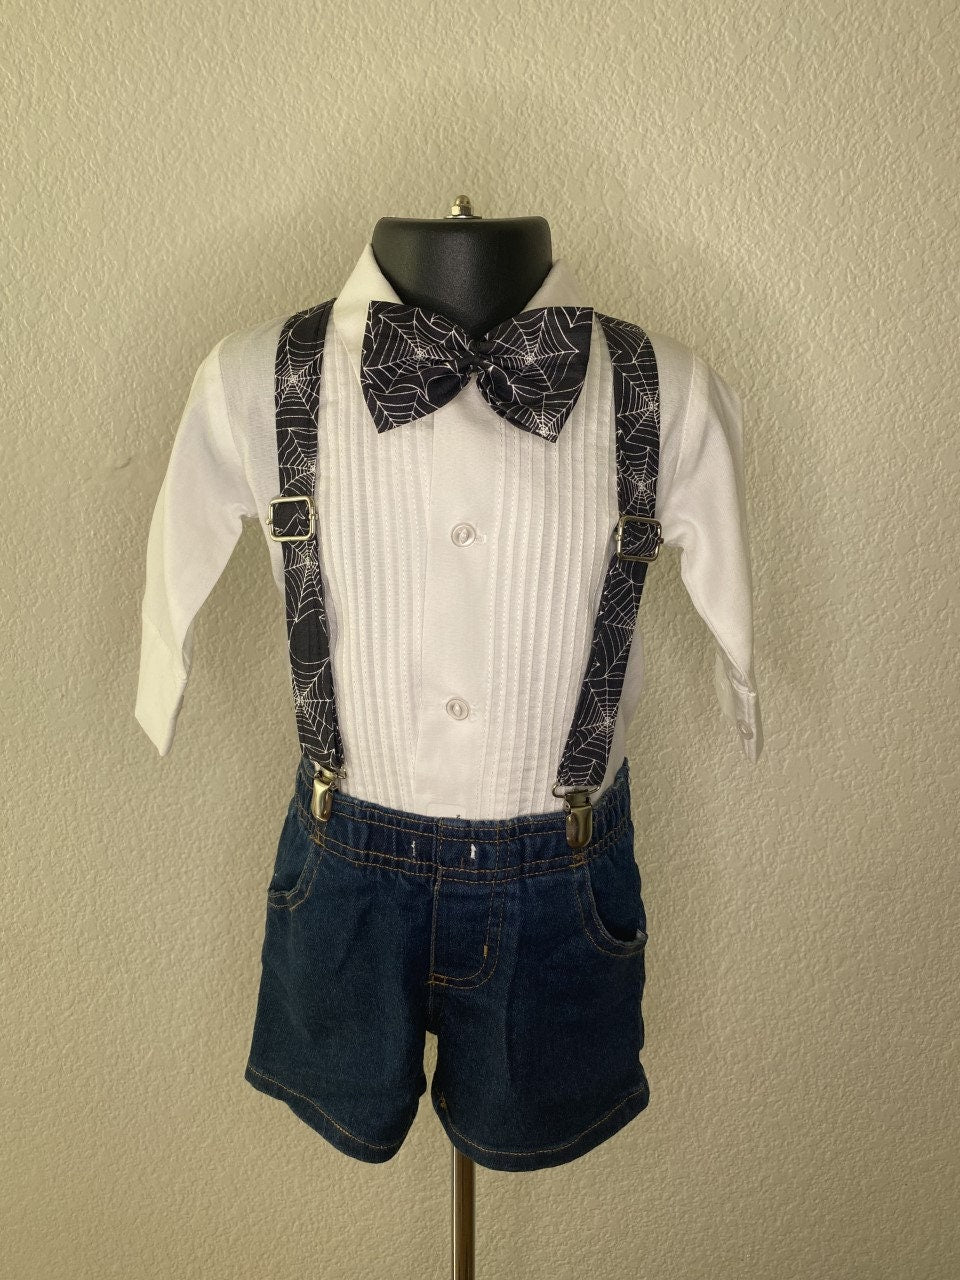 Halloween Black Spiderweb suspenders and bow tie / Infant, Toddler, Child, Teen, Adult, Big & Tall